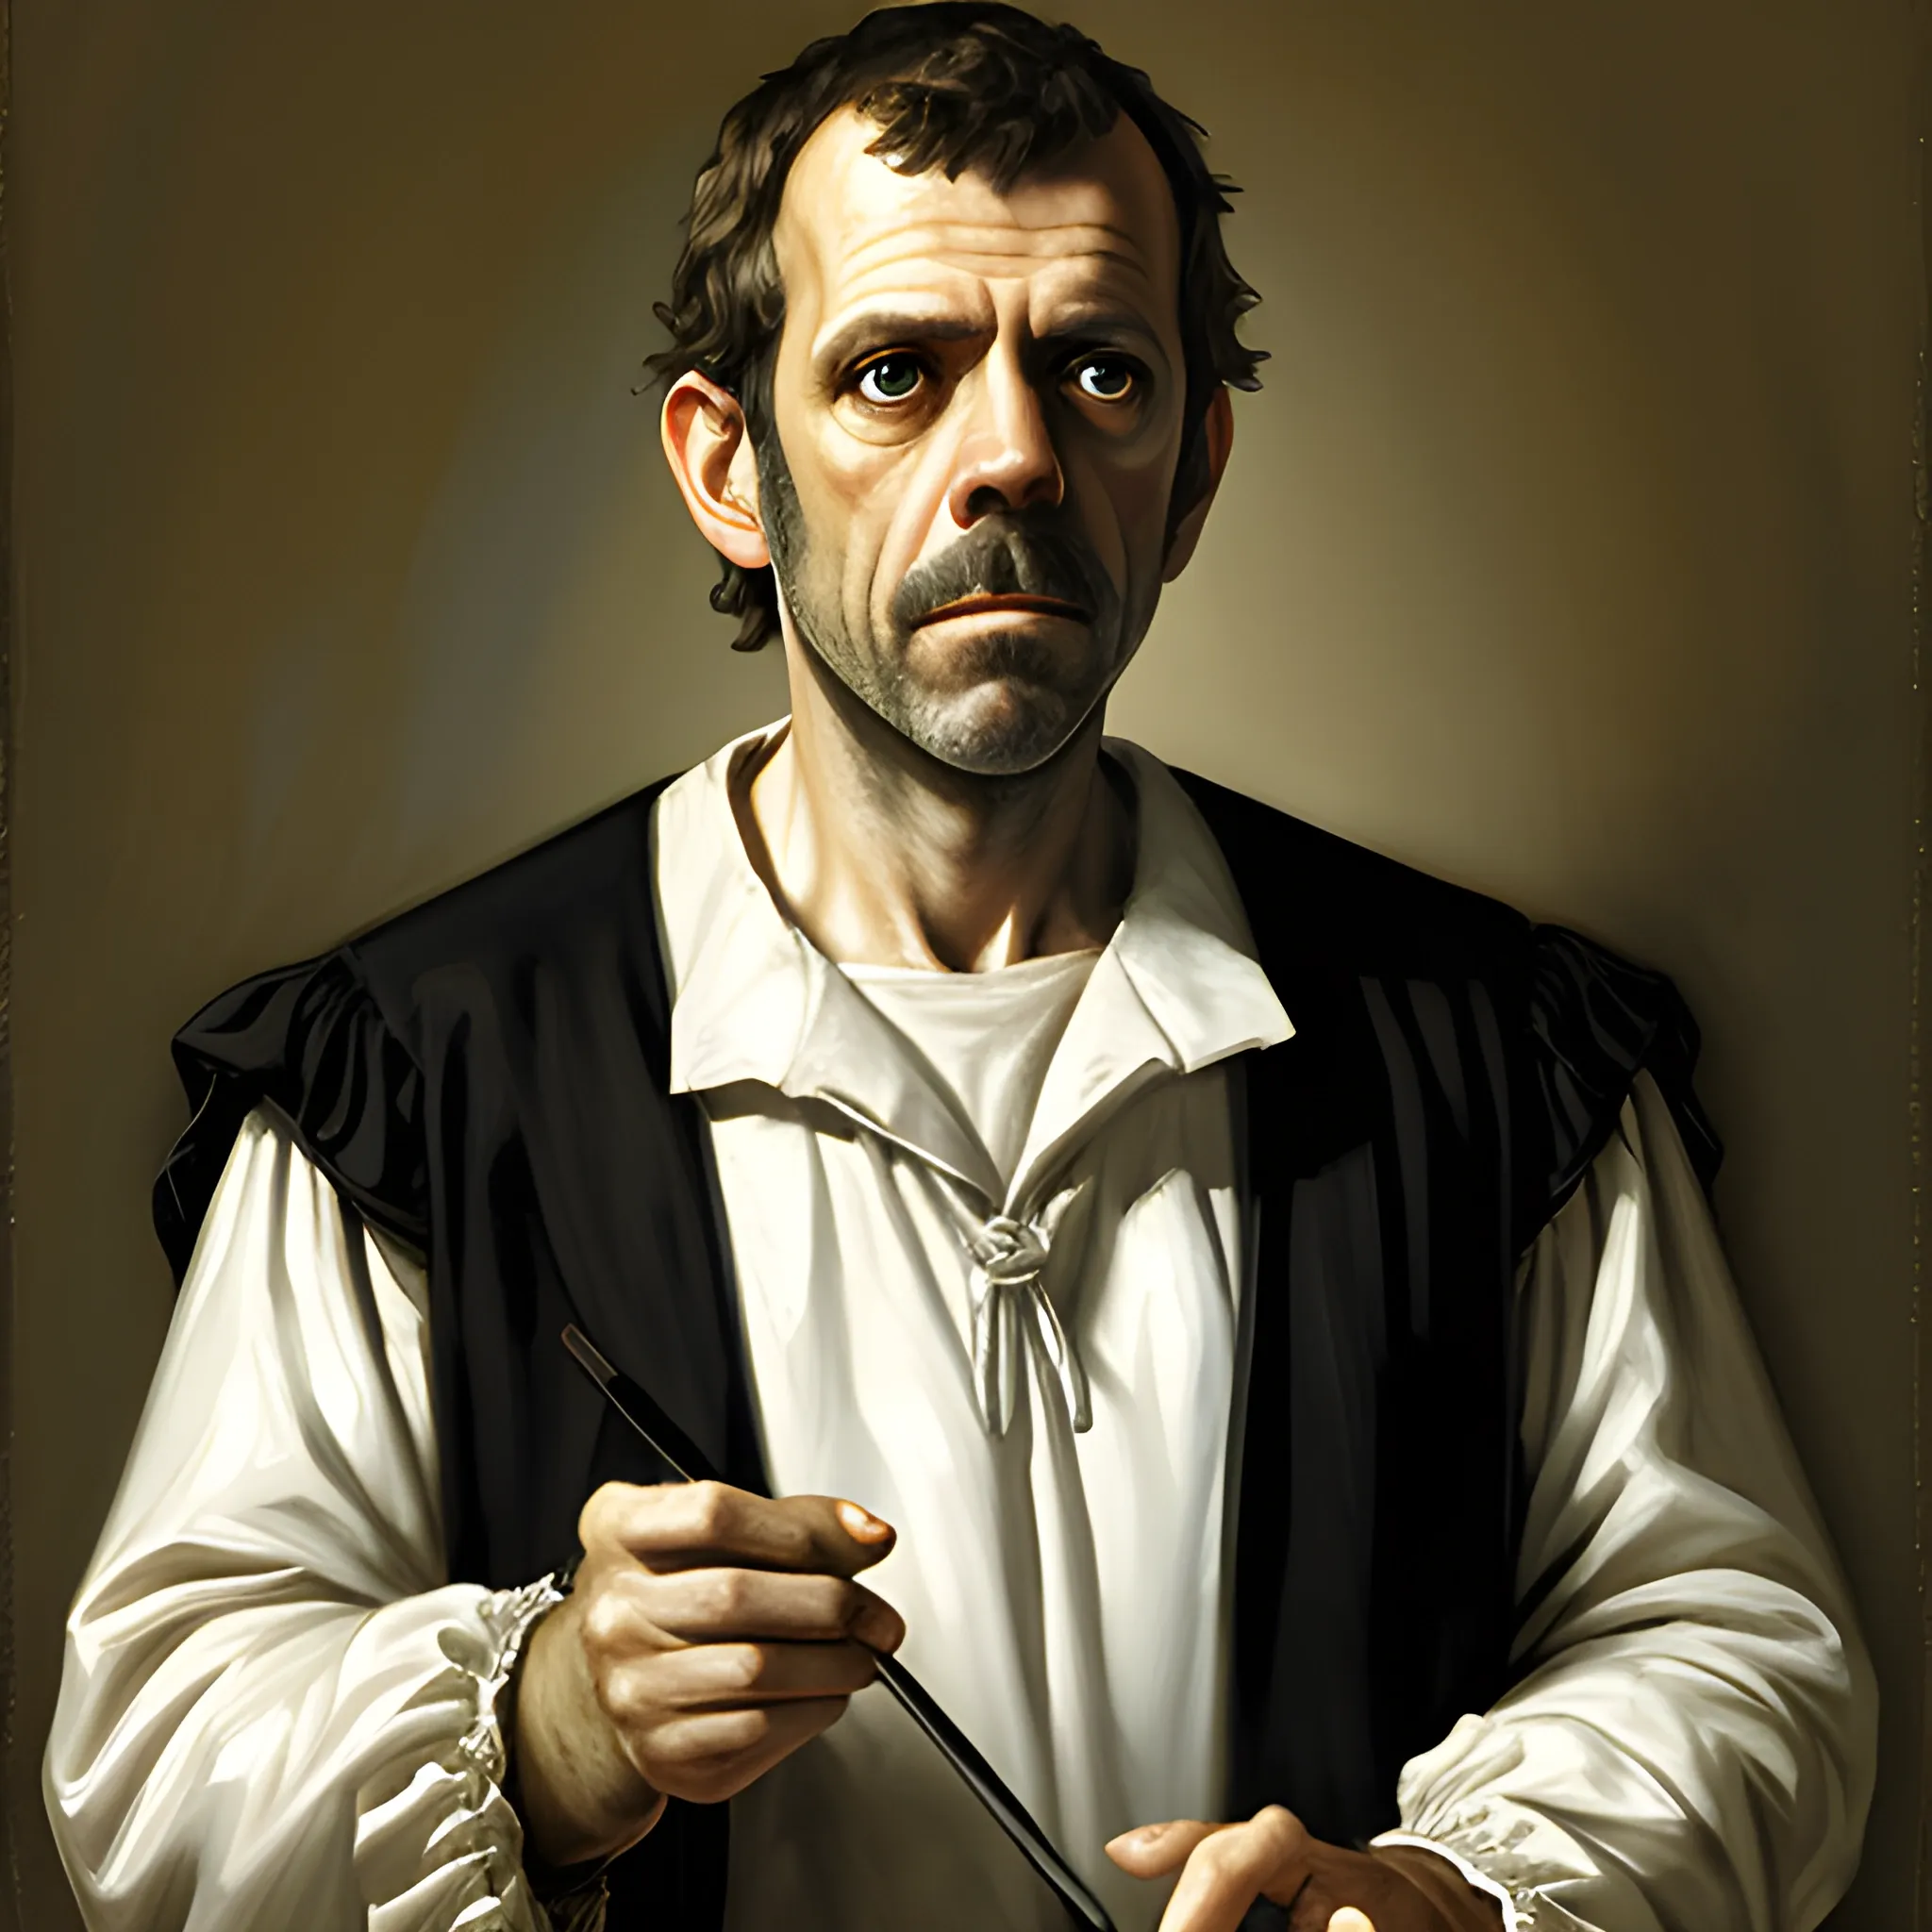 Wonderful Dr House painting portrait, Francisco de Goya oil painting style, highly detailed, free, fantasy, beautiful